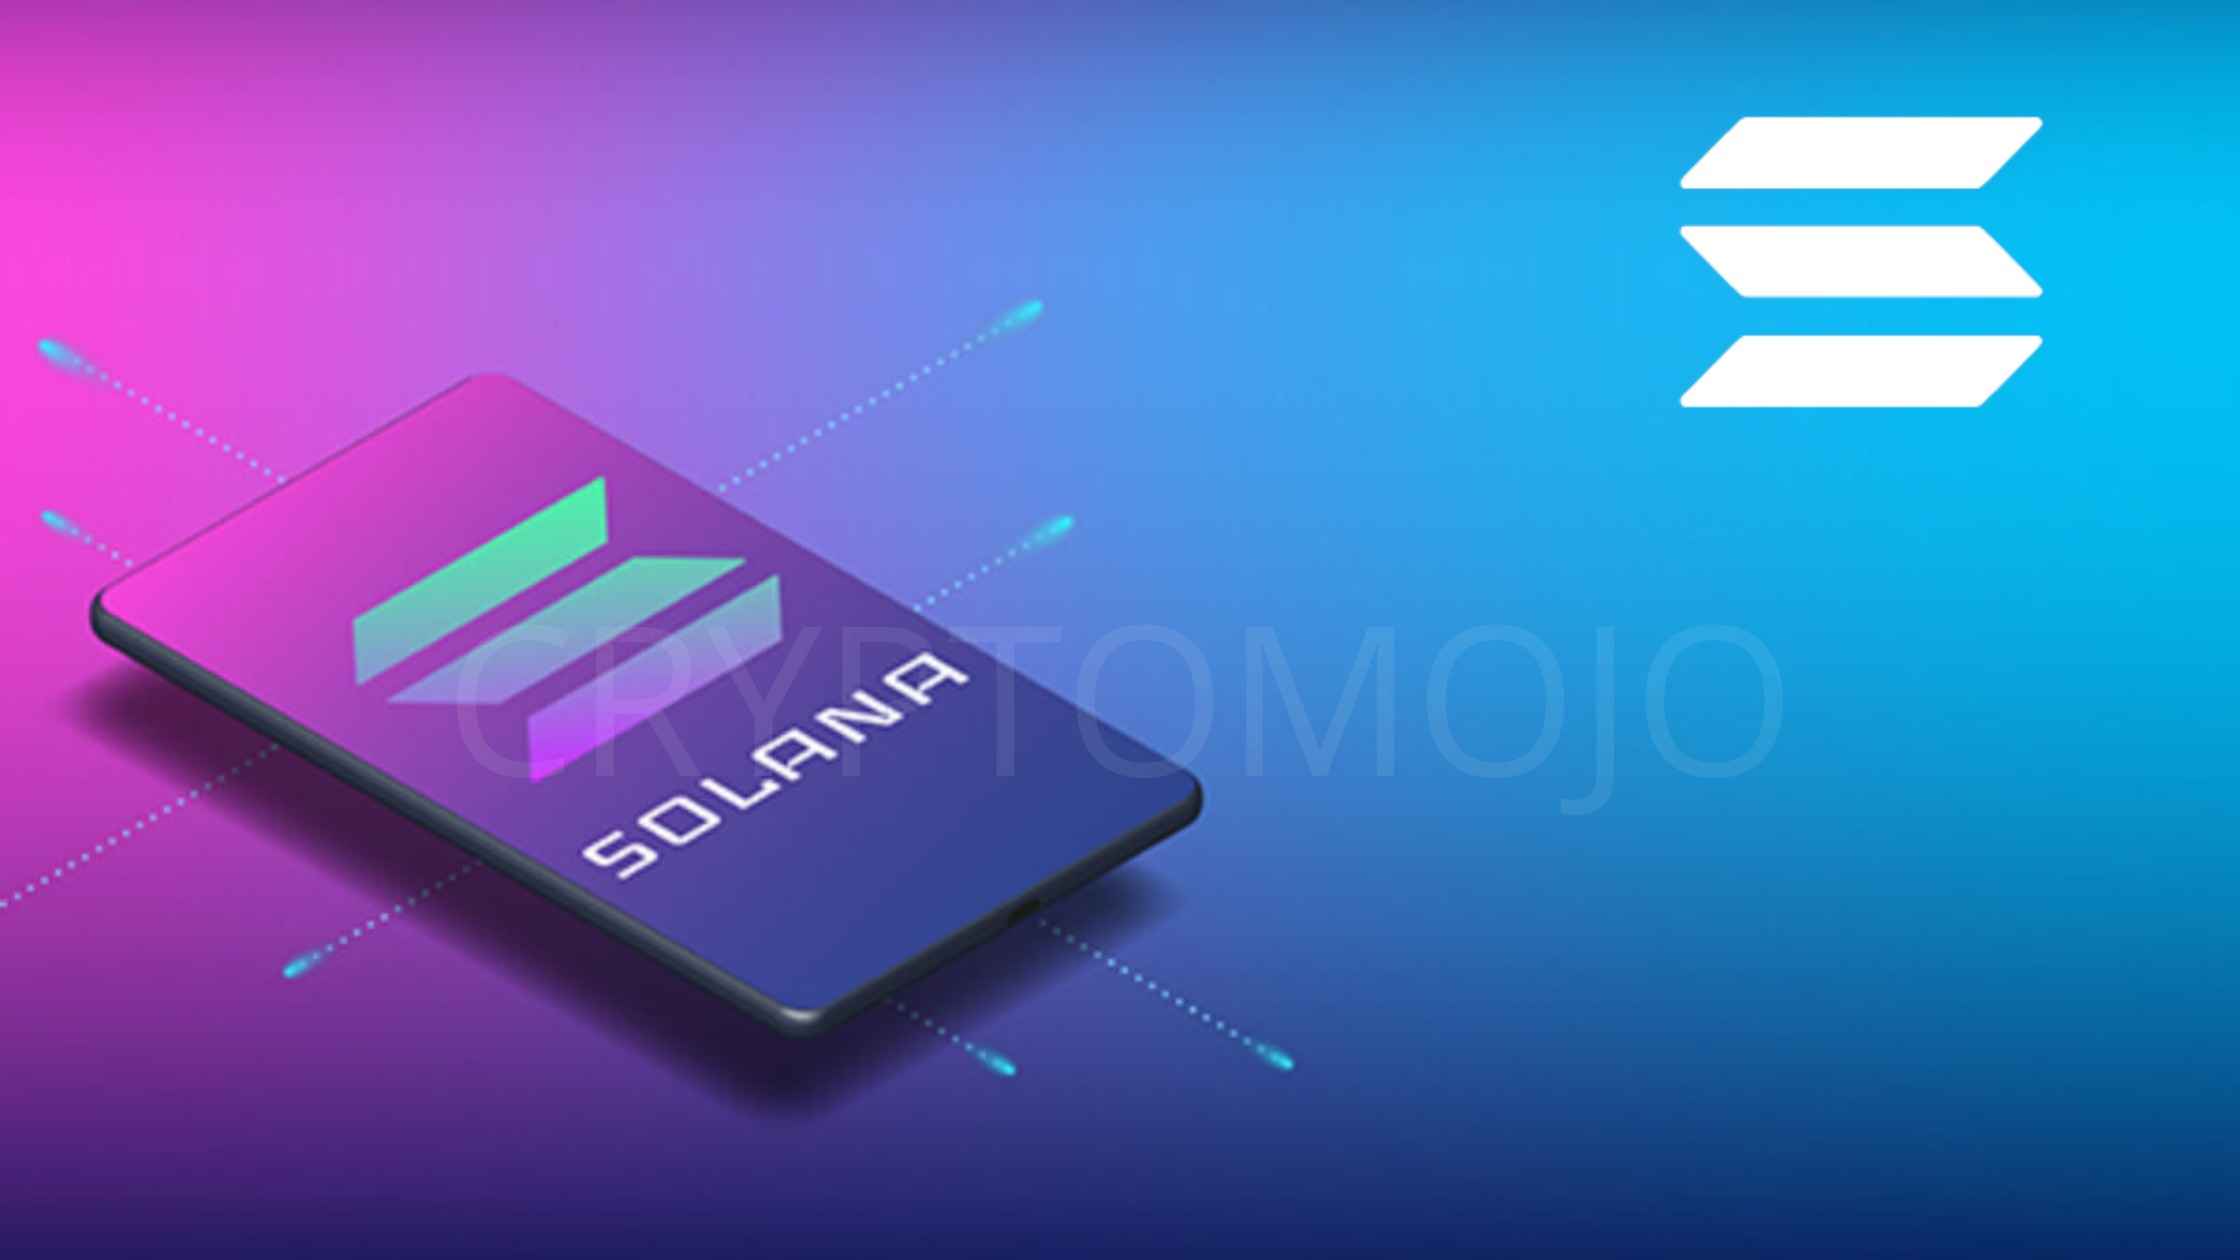 Solana Launches Crypto-Native Smartphone Says “Time To Go Mobile”